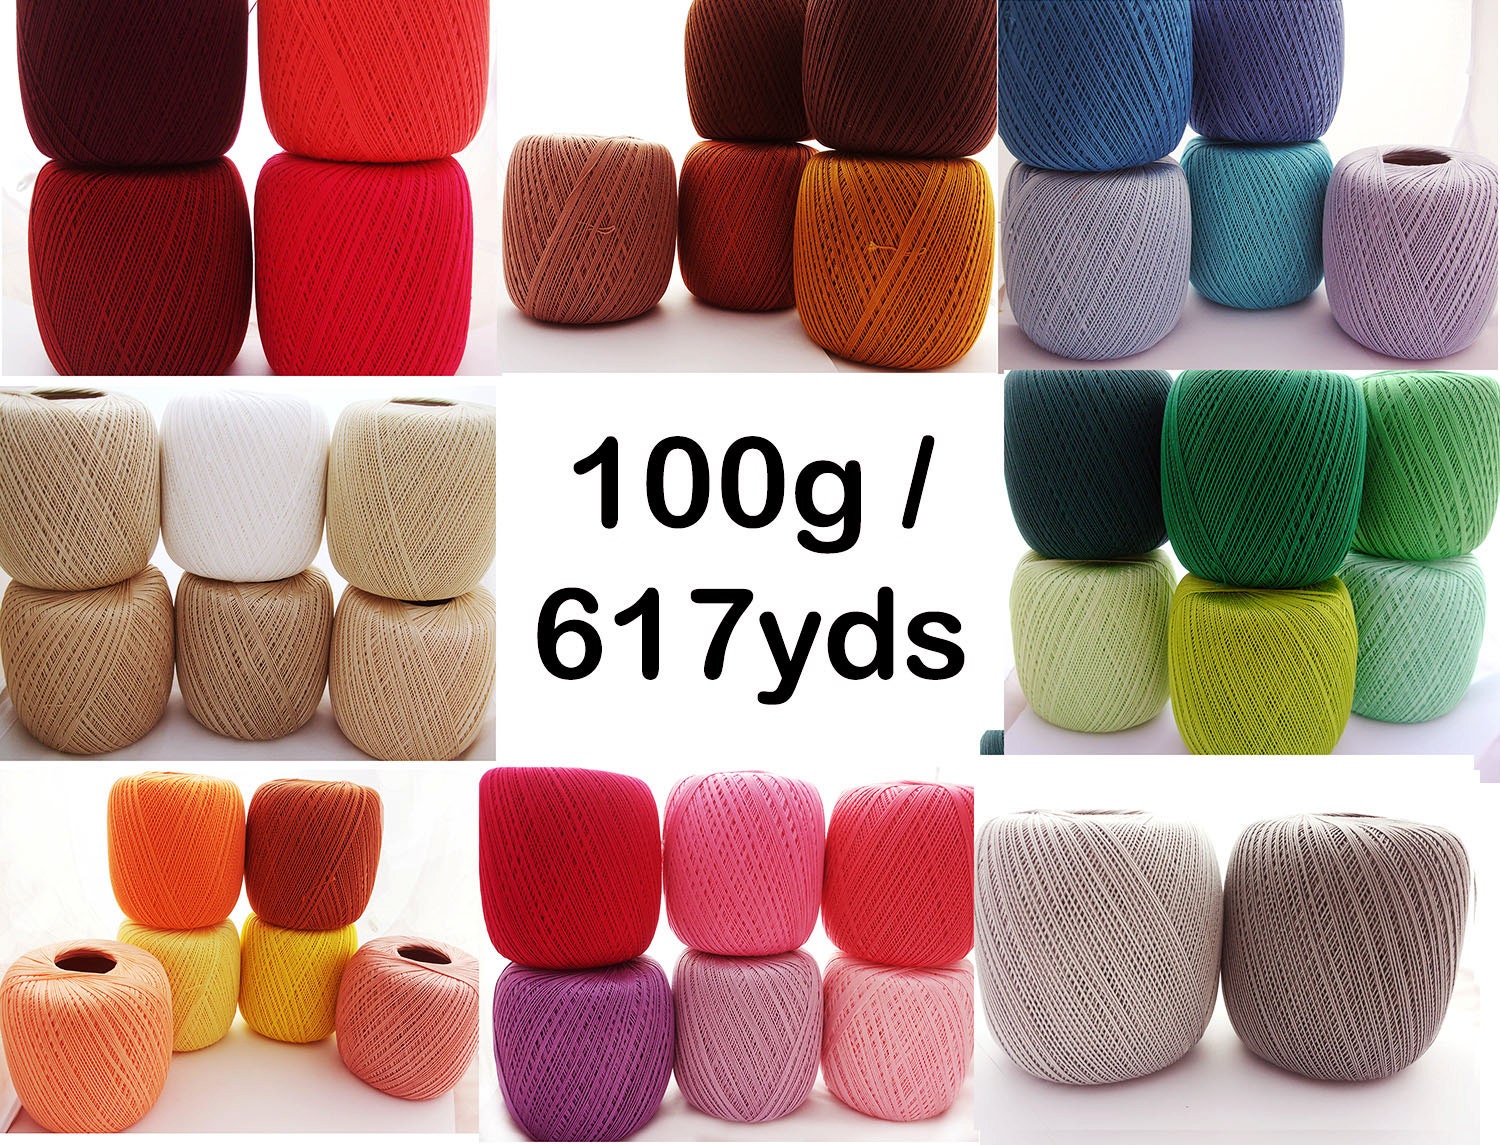 crochet cotton thread size 10 100g x 616yds 3ply by Fiscraftland